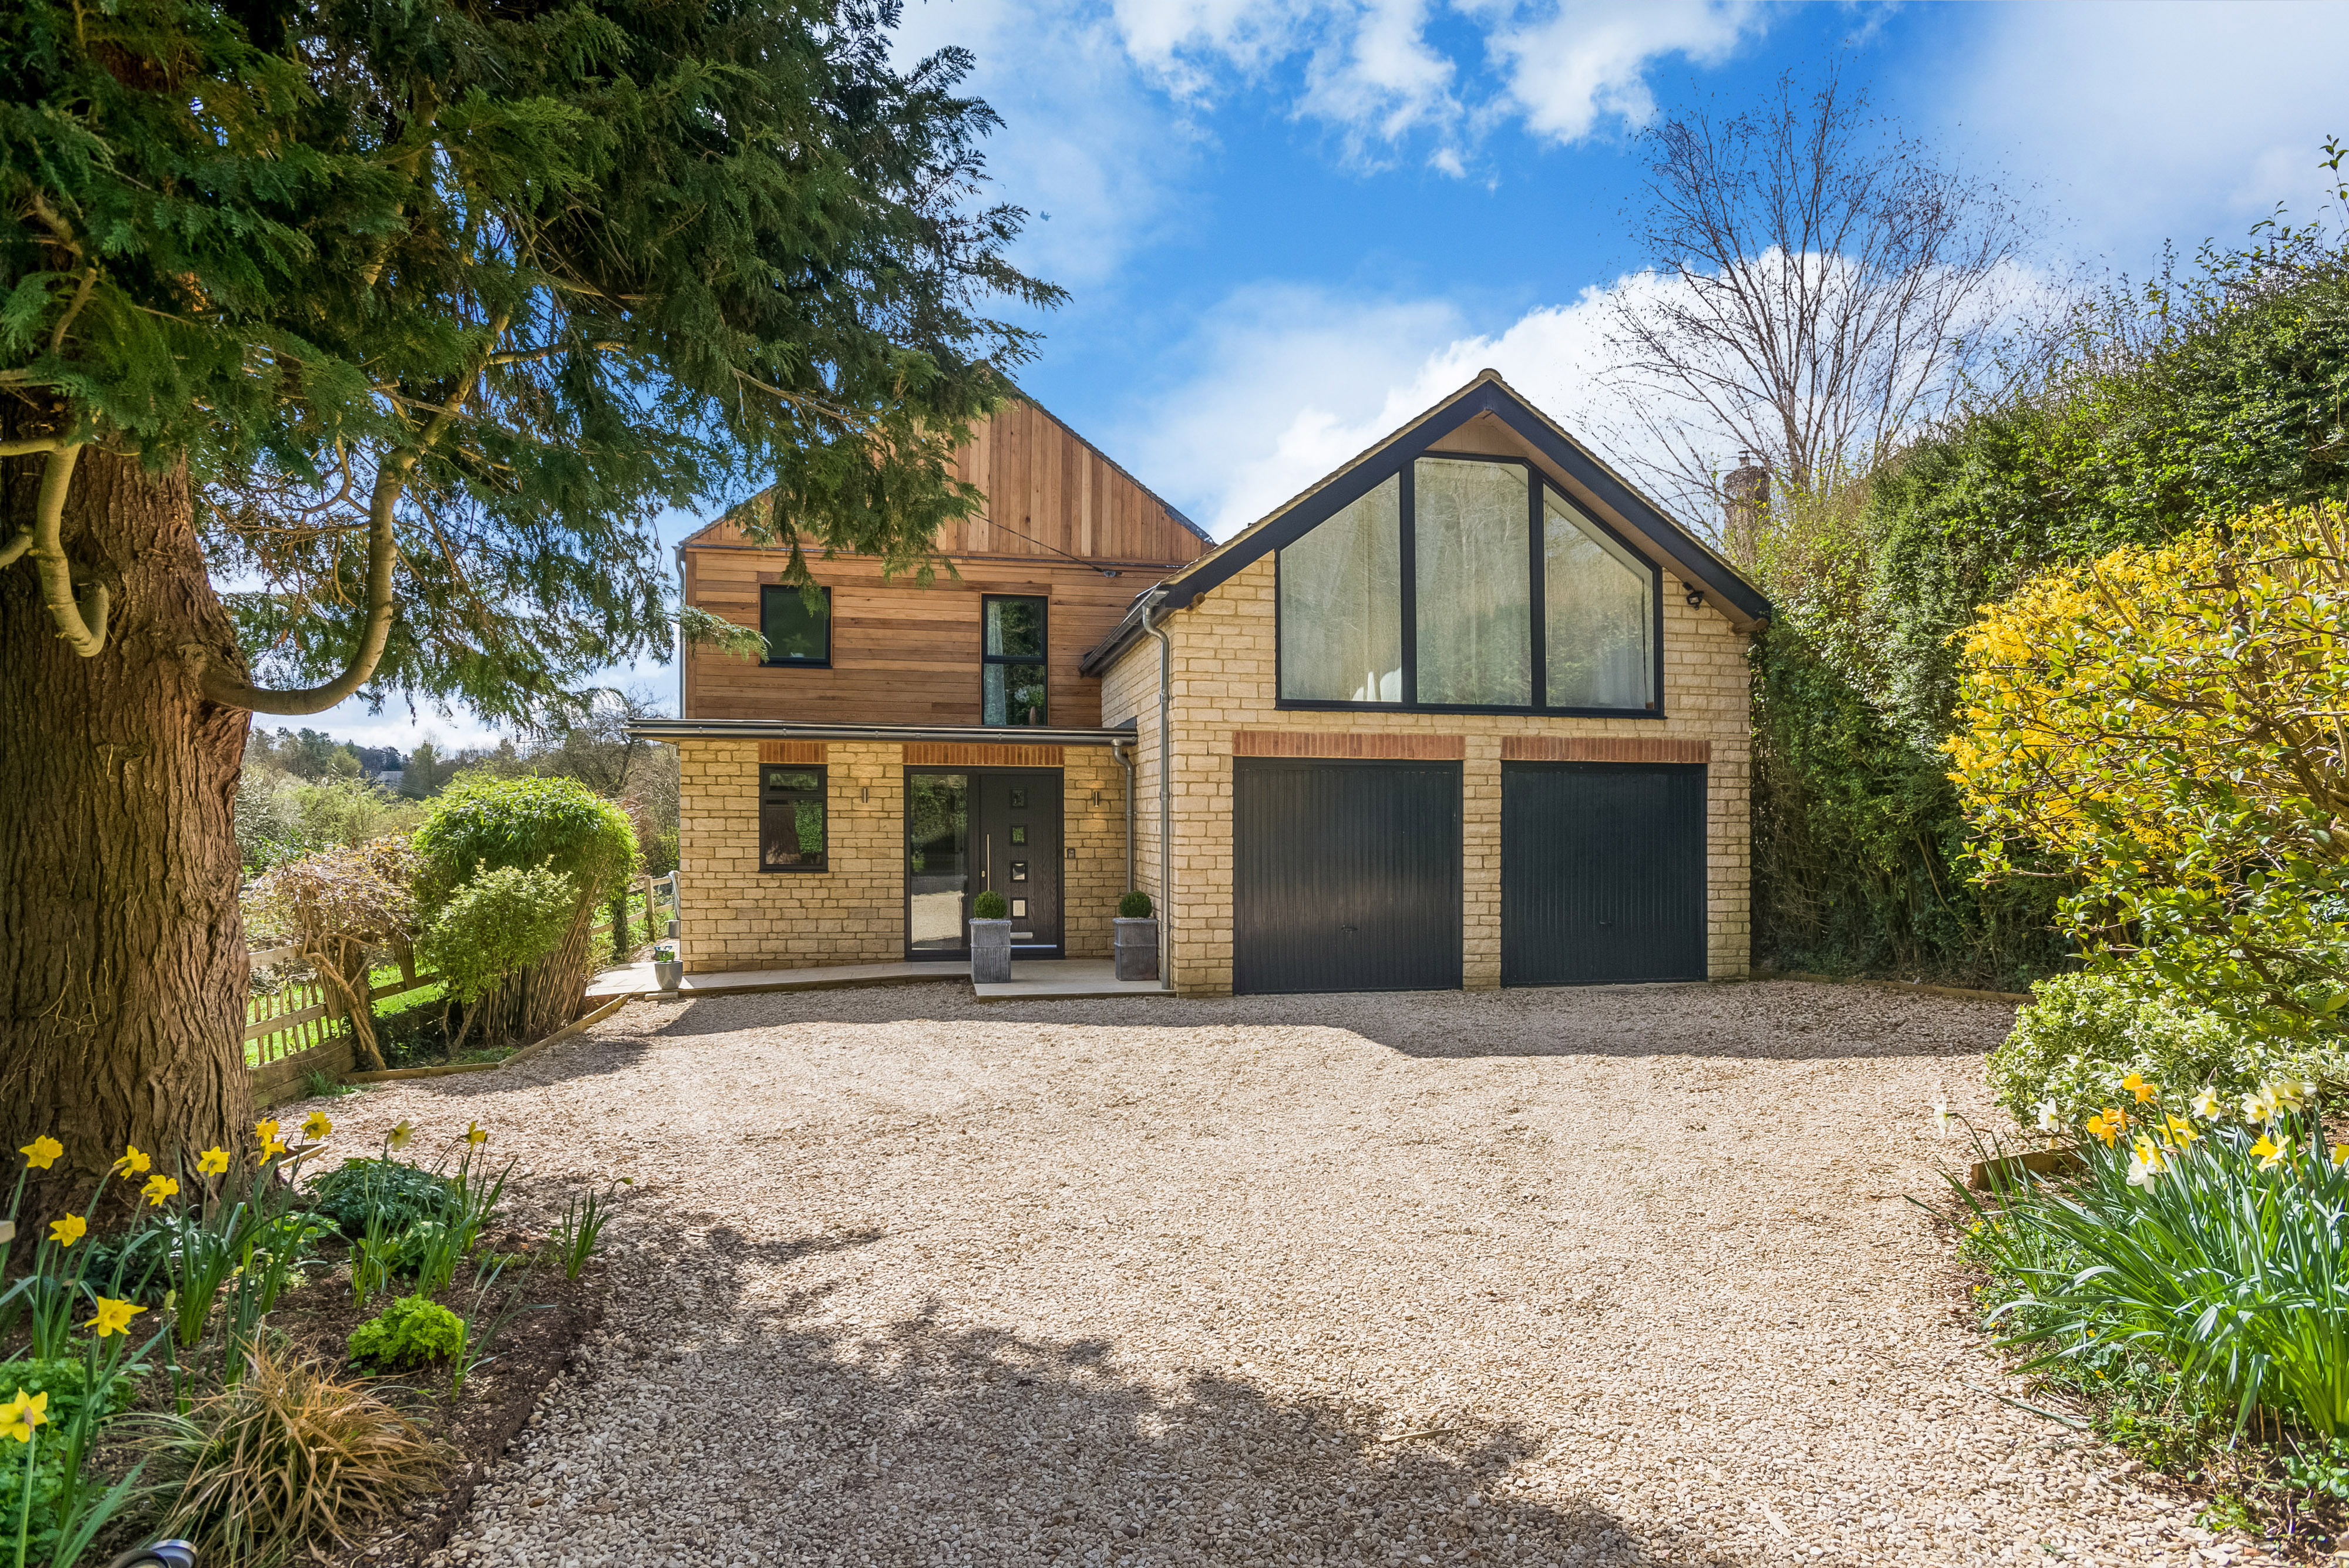 6 bed  for sale in Bicester Road, Chipping Norton 0